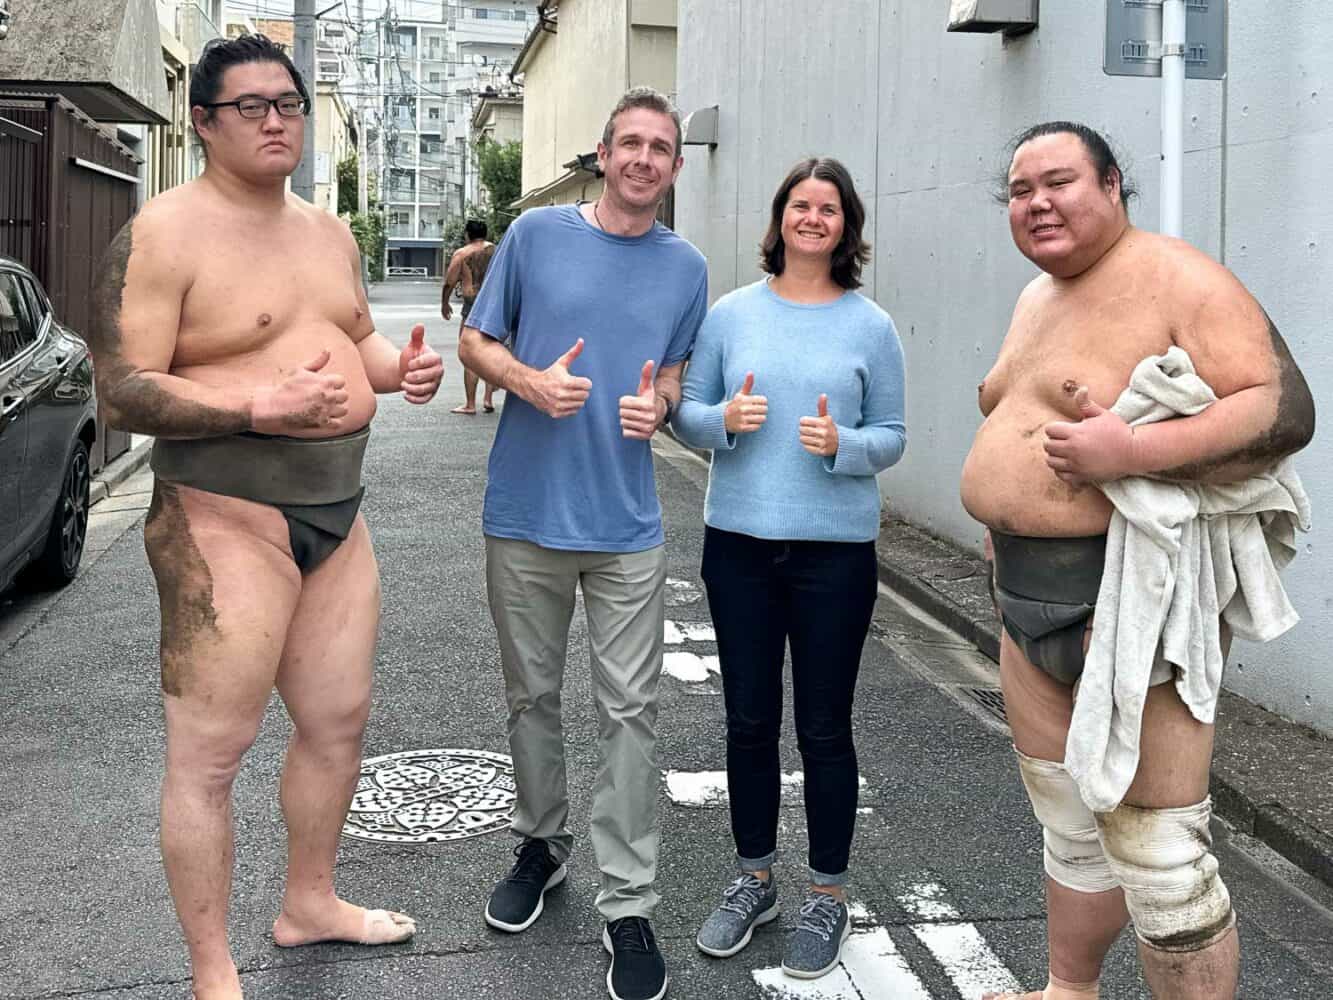 Meeting sumo wrestlers at a sumo stable in Tokyo